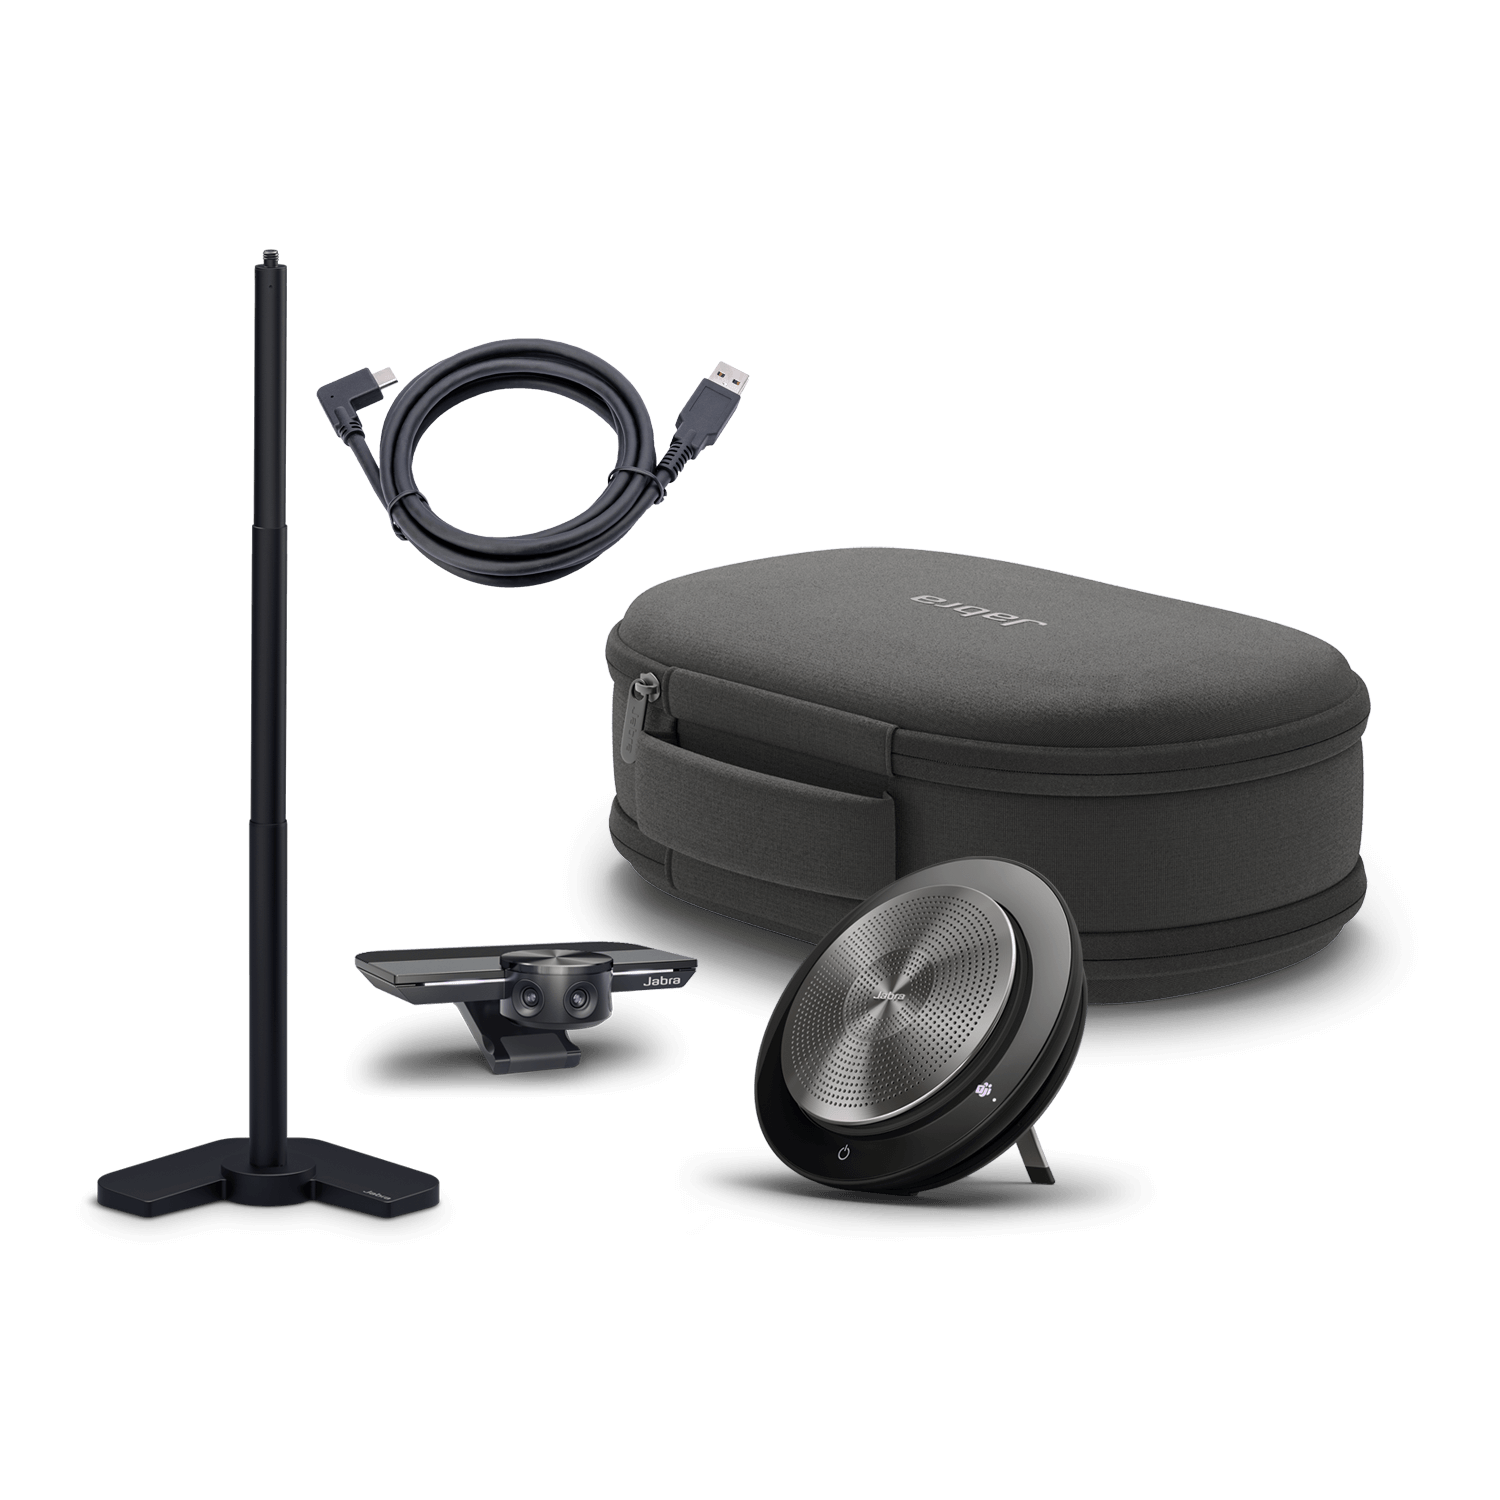 Jabra PanaCast Meet Anywhere Plus,</br>P30 + 750 MS + Cable 1.8M + Table Stand + Travel Case